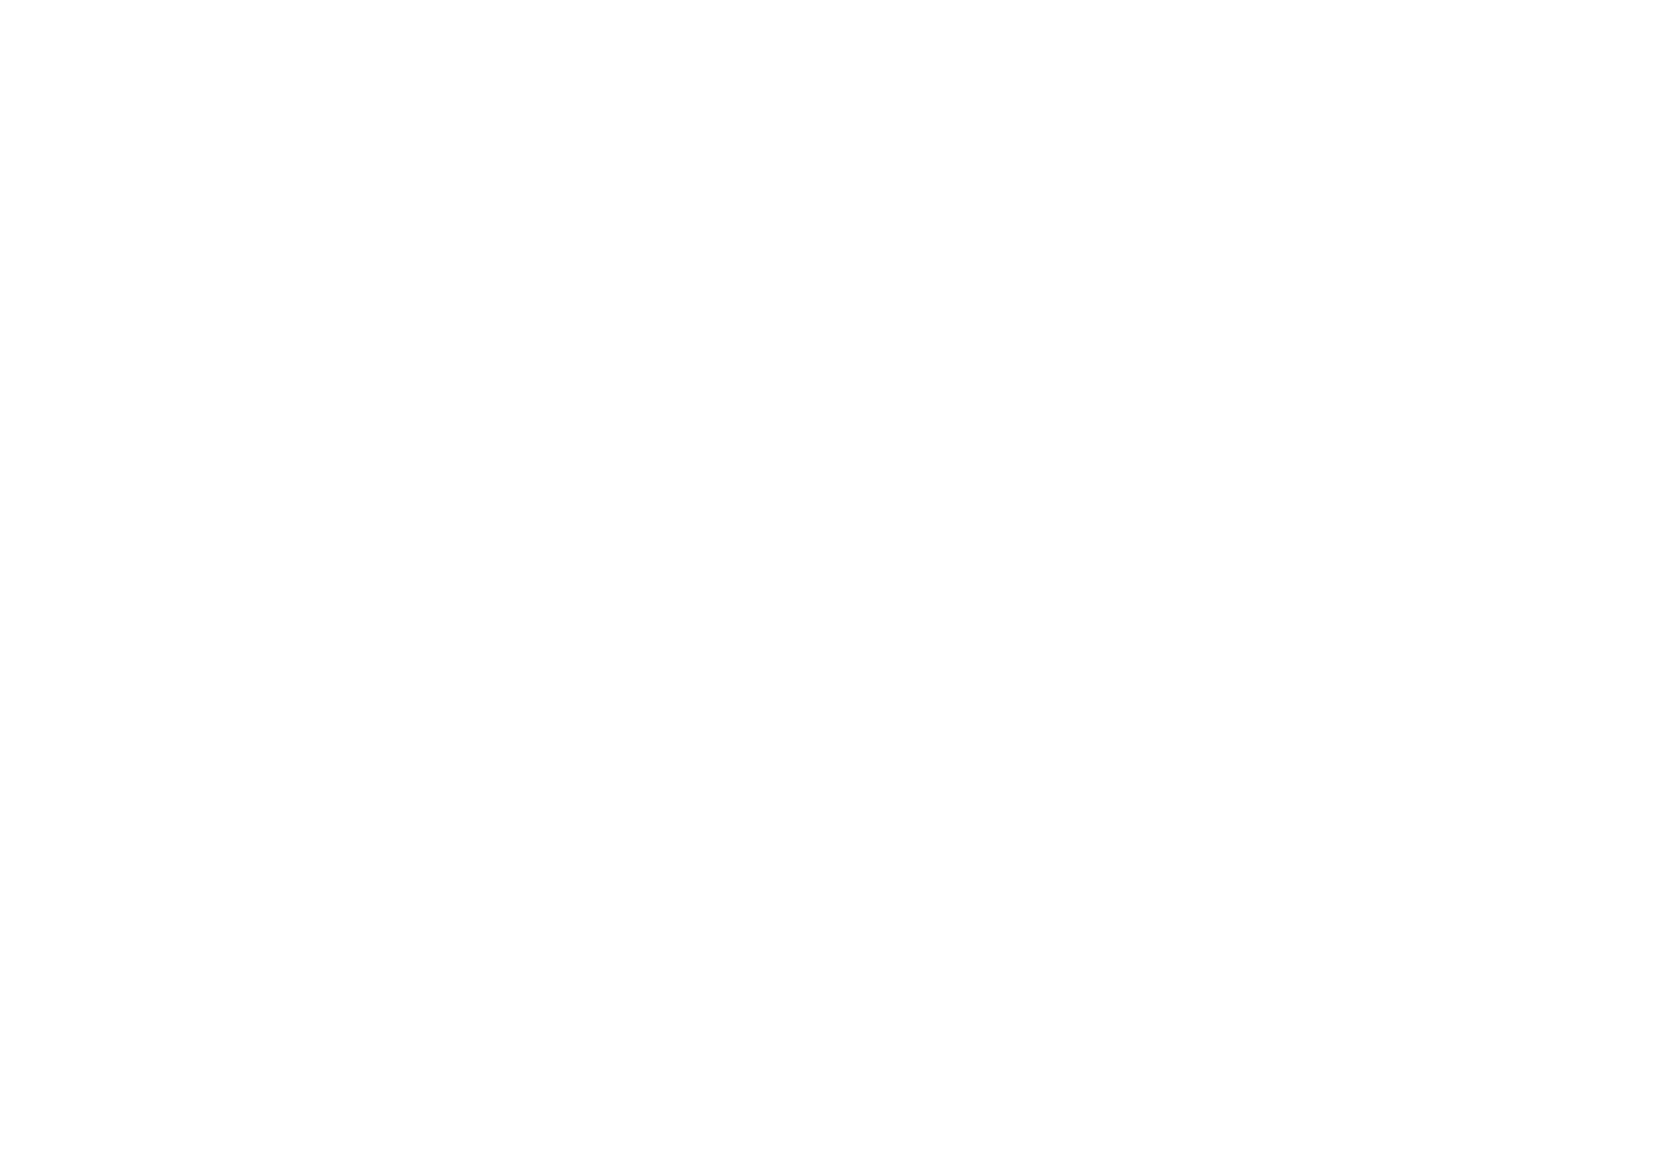 Chamber of trade